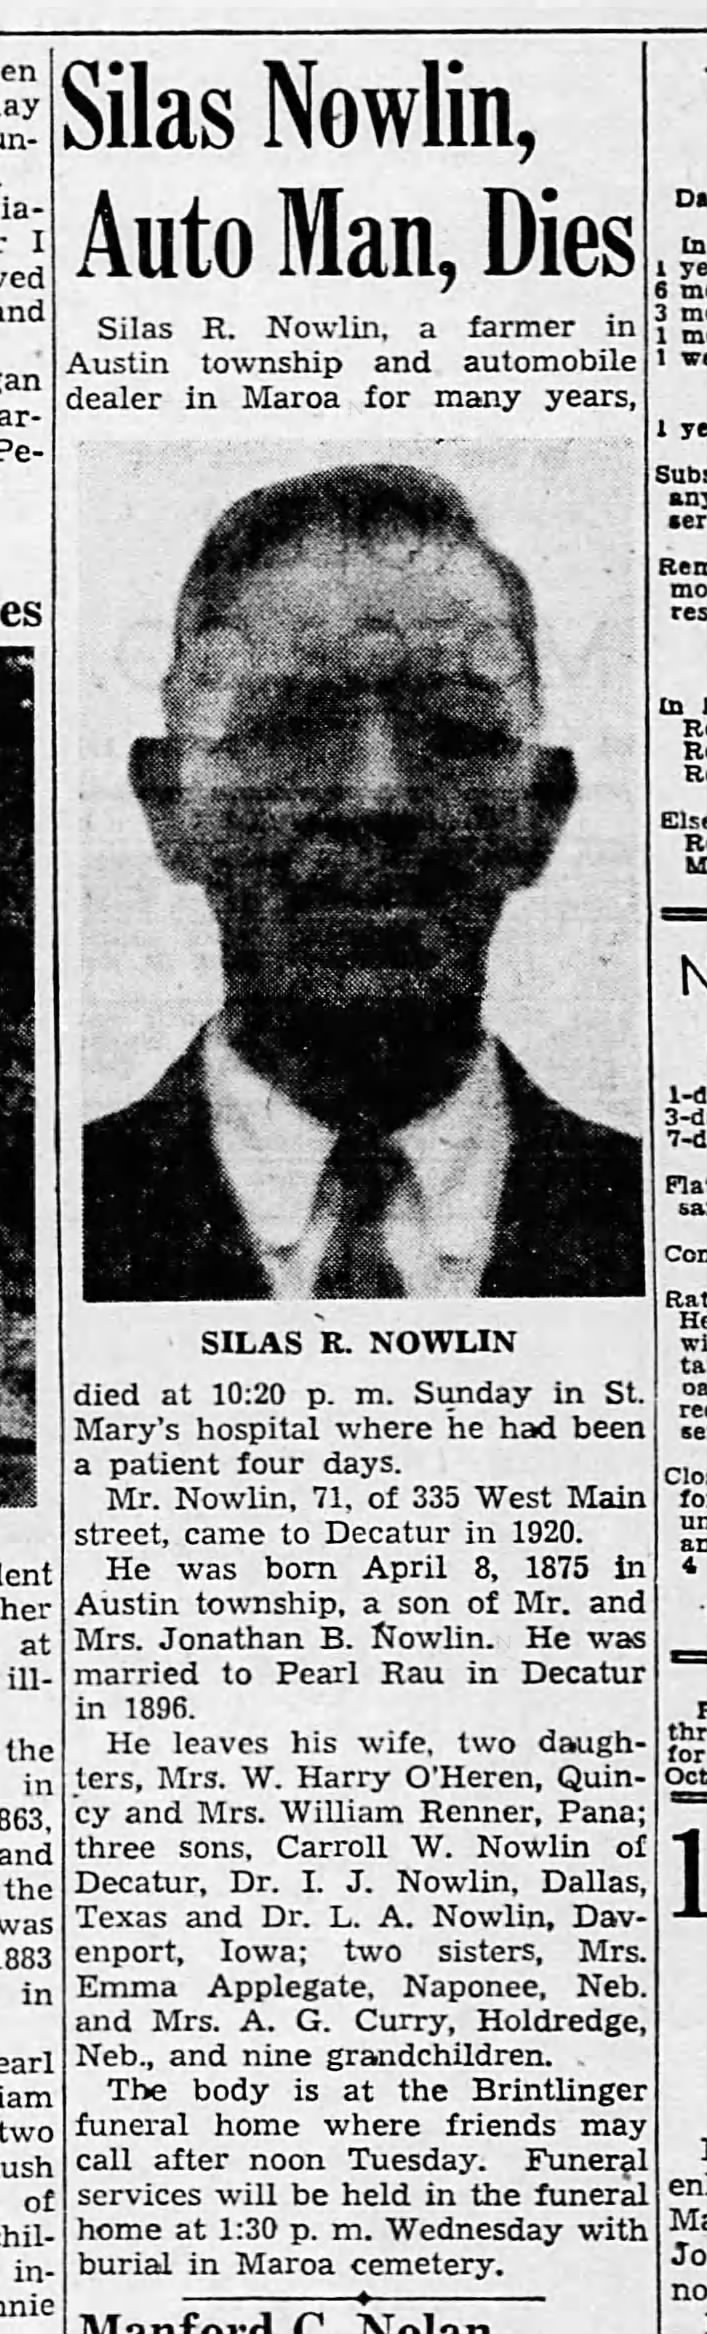 Obituary: Silas R. Nowin